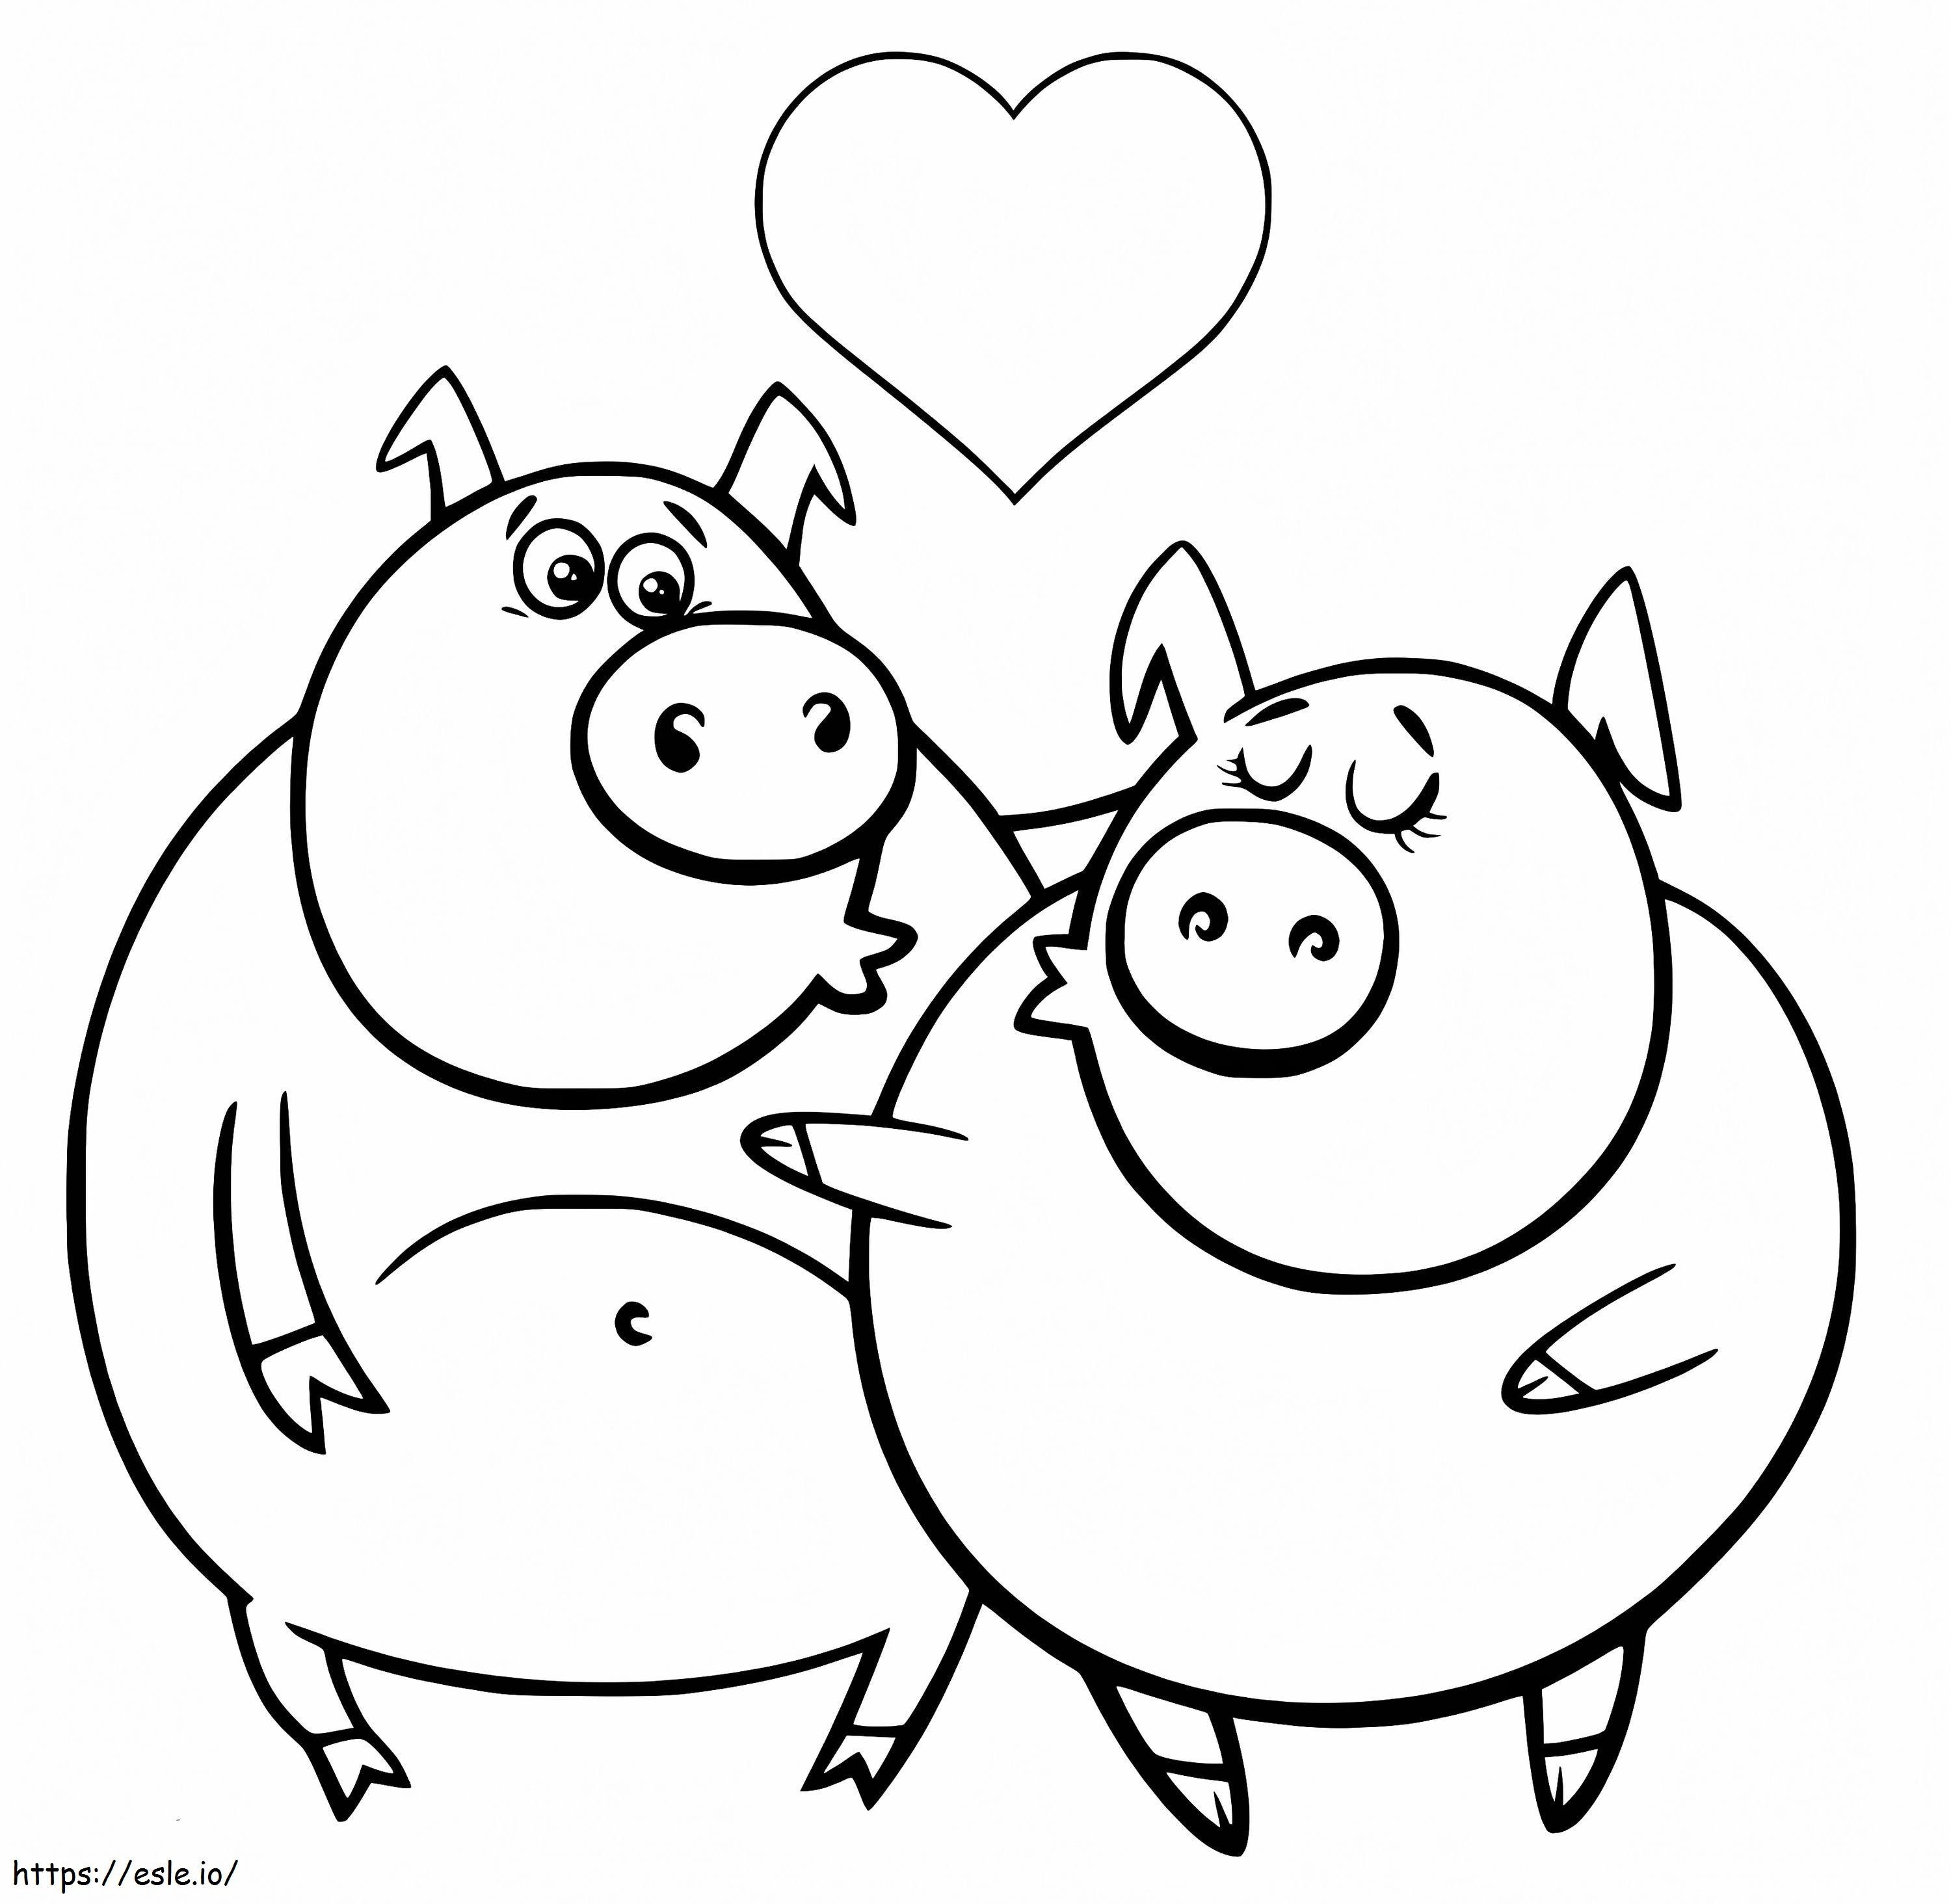 Pig Couple coloring page